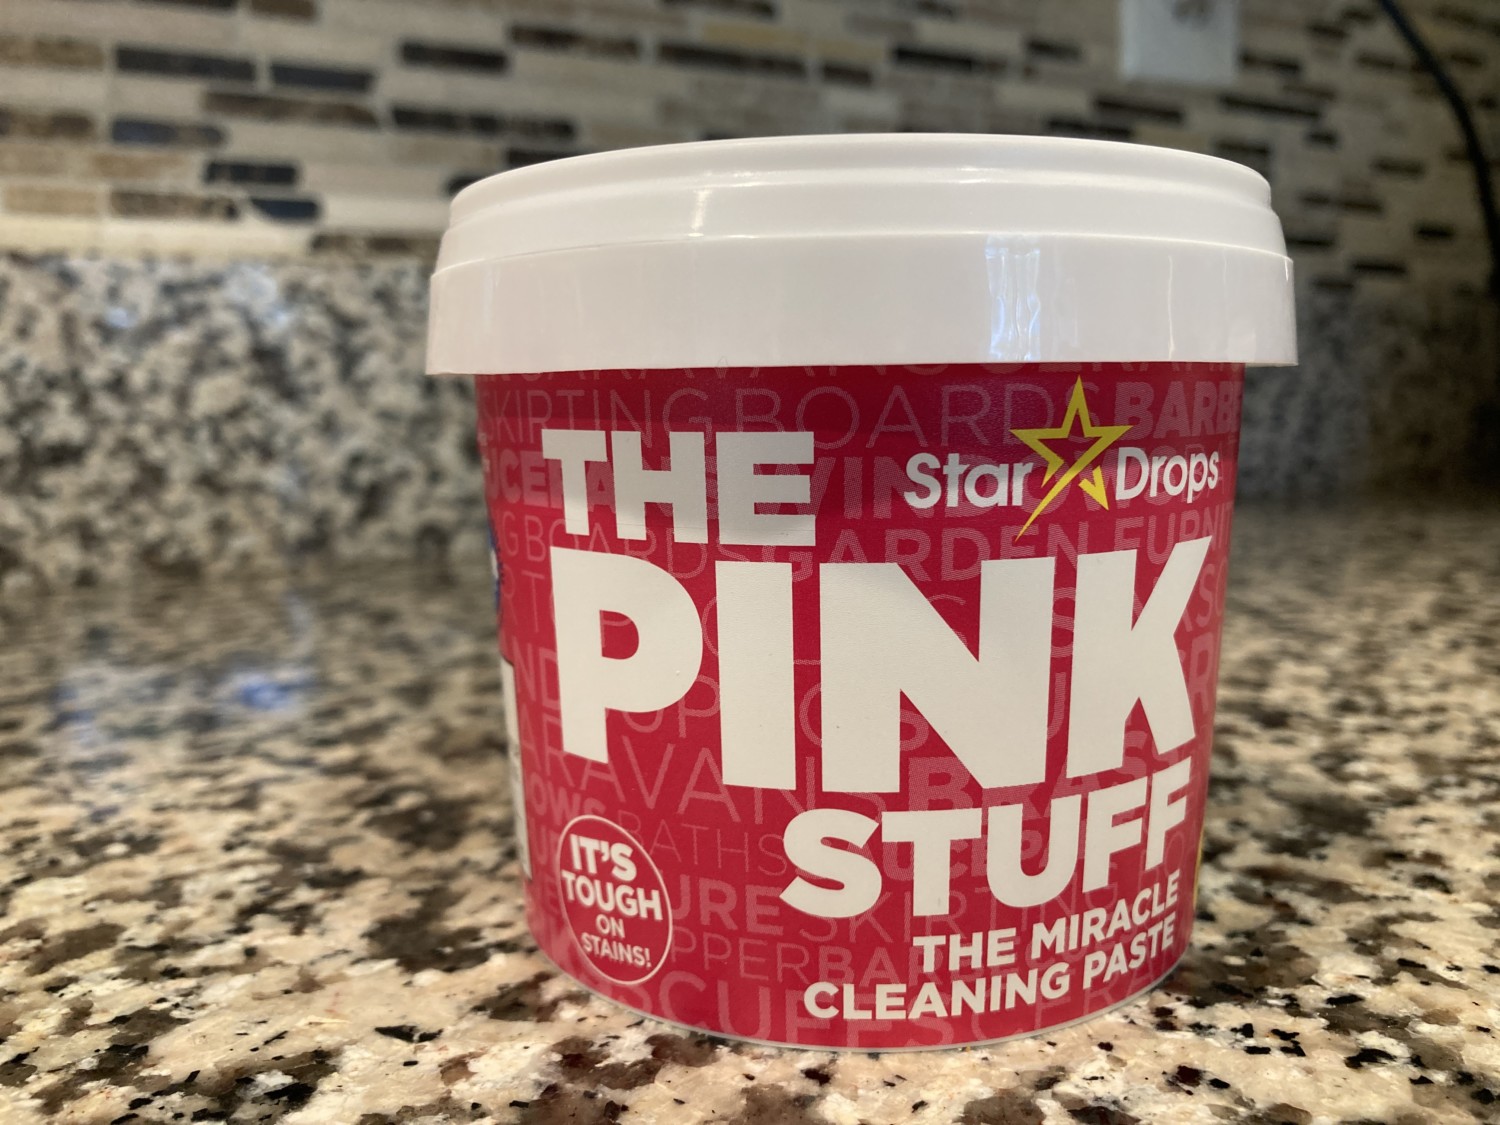 Does The Pink Stuff cleaning paste live up to the hype?